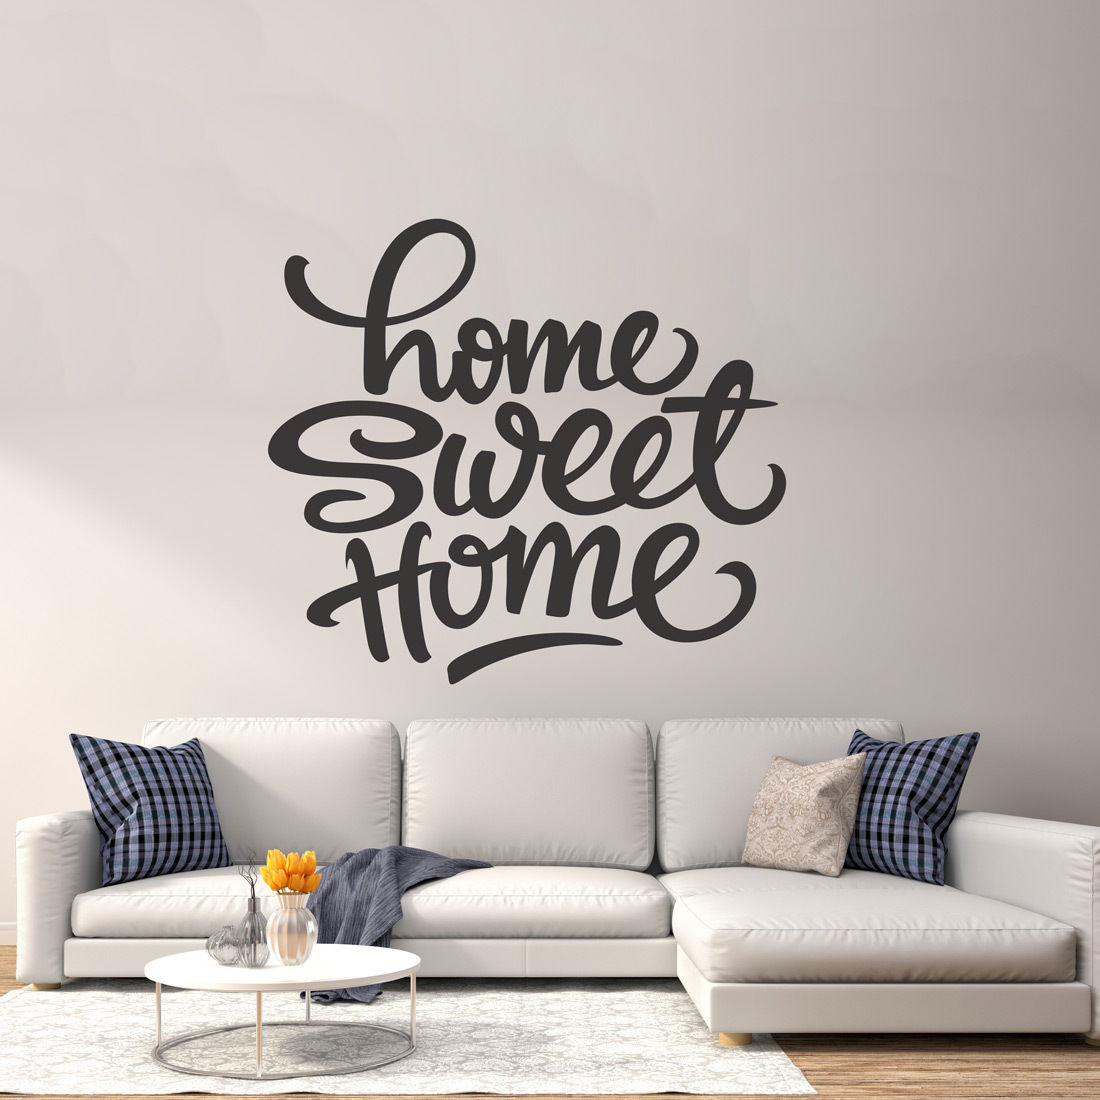 Wall Stickers For Living Room
 Sweet Home Wall Decor Vinyl Sticker Decal Livingroom